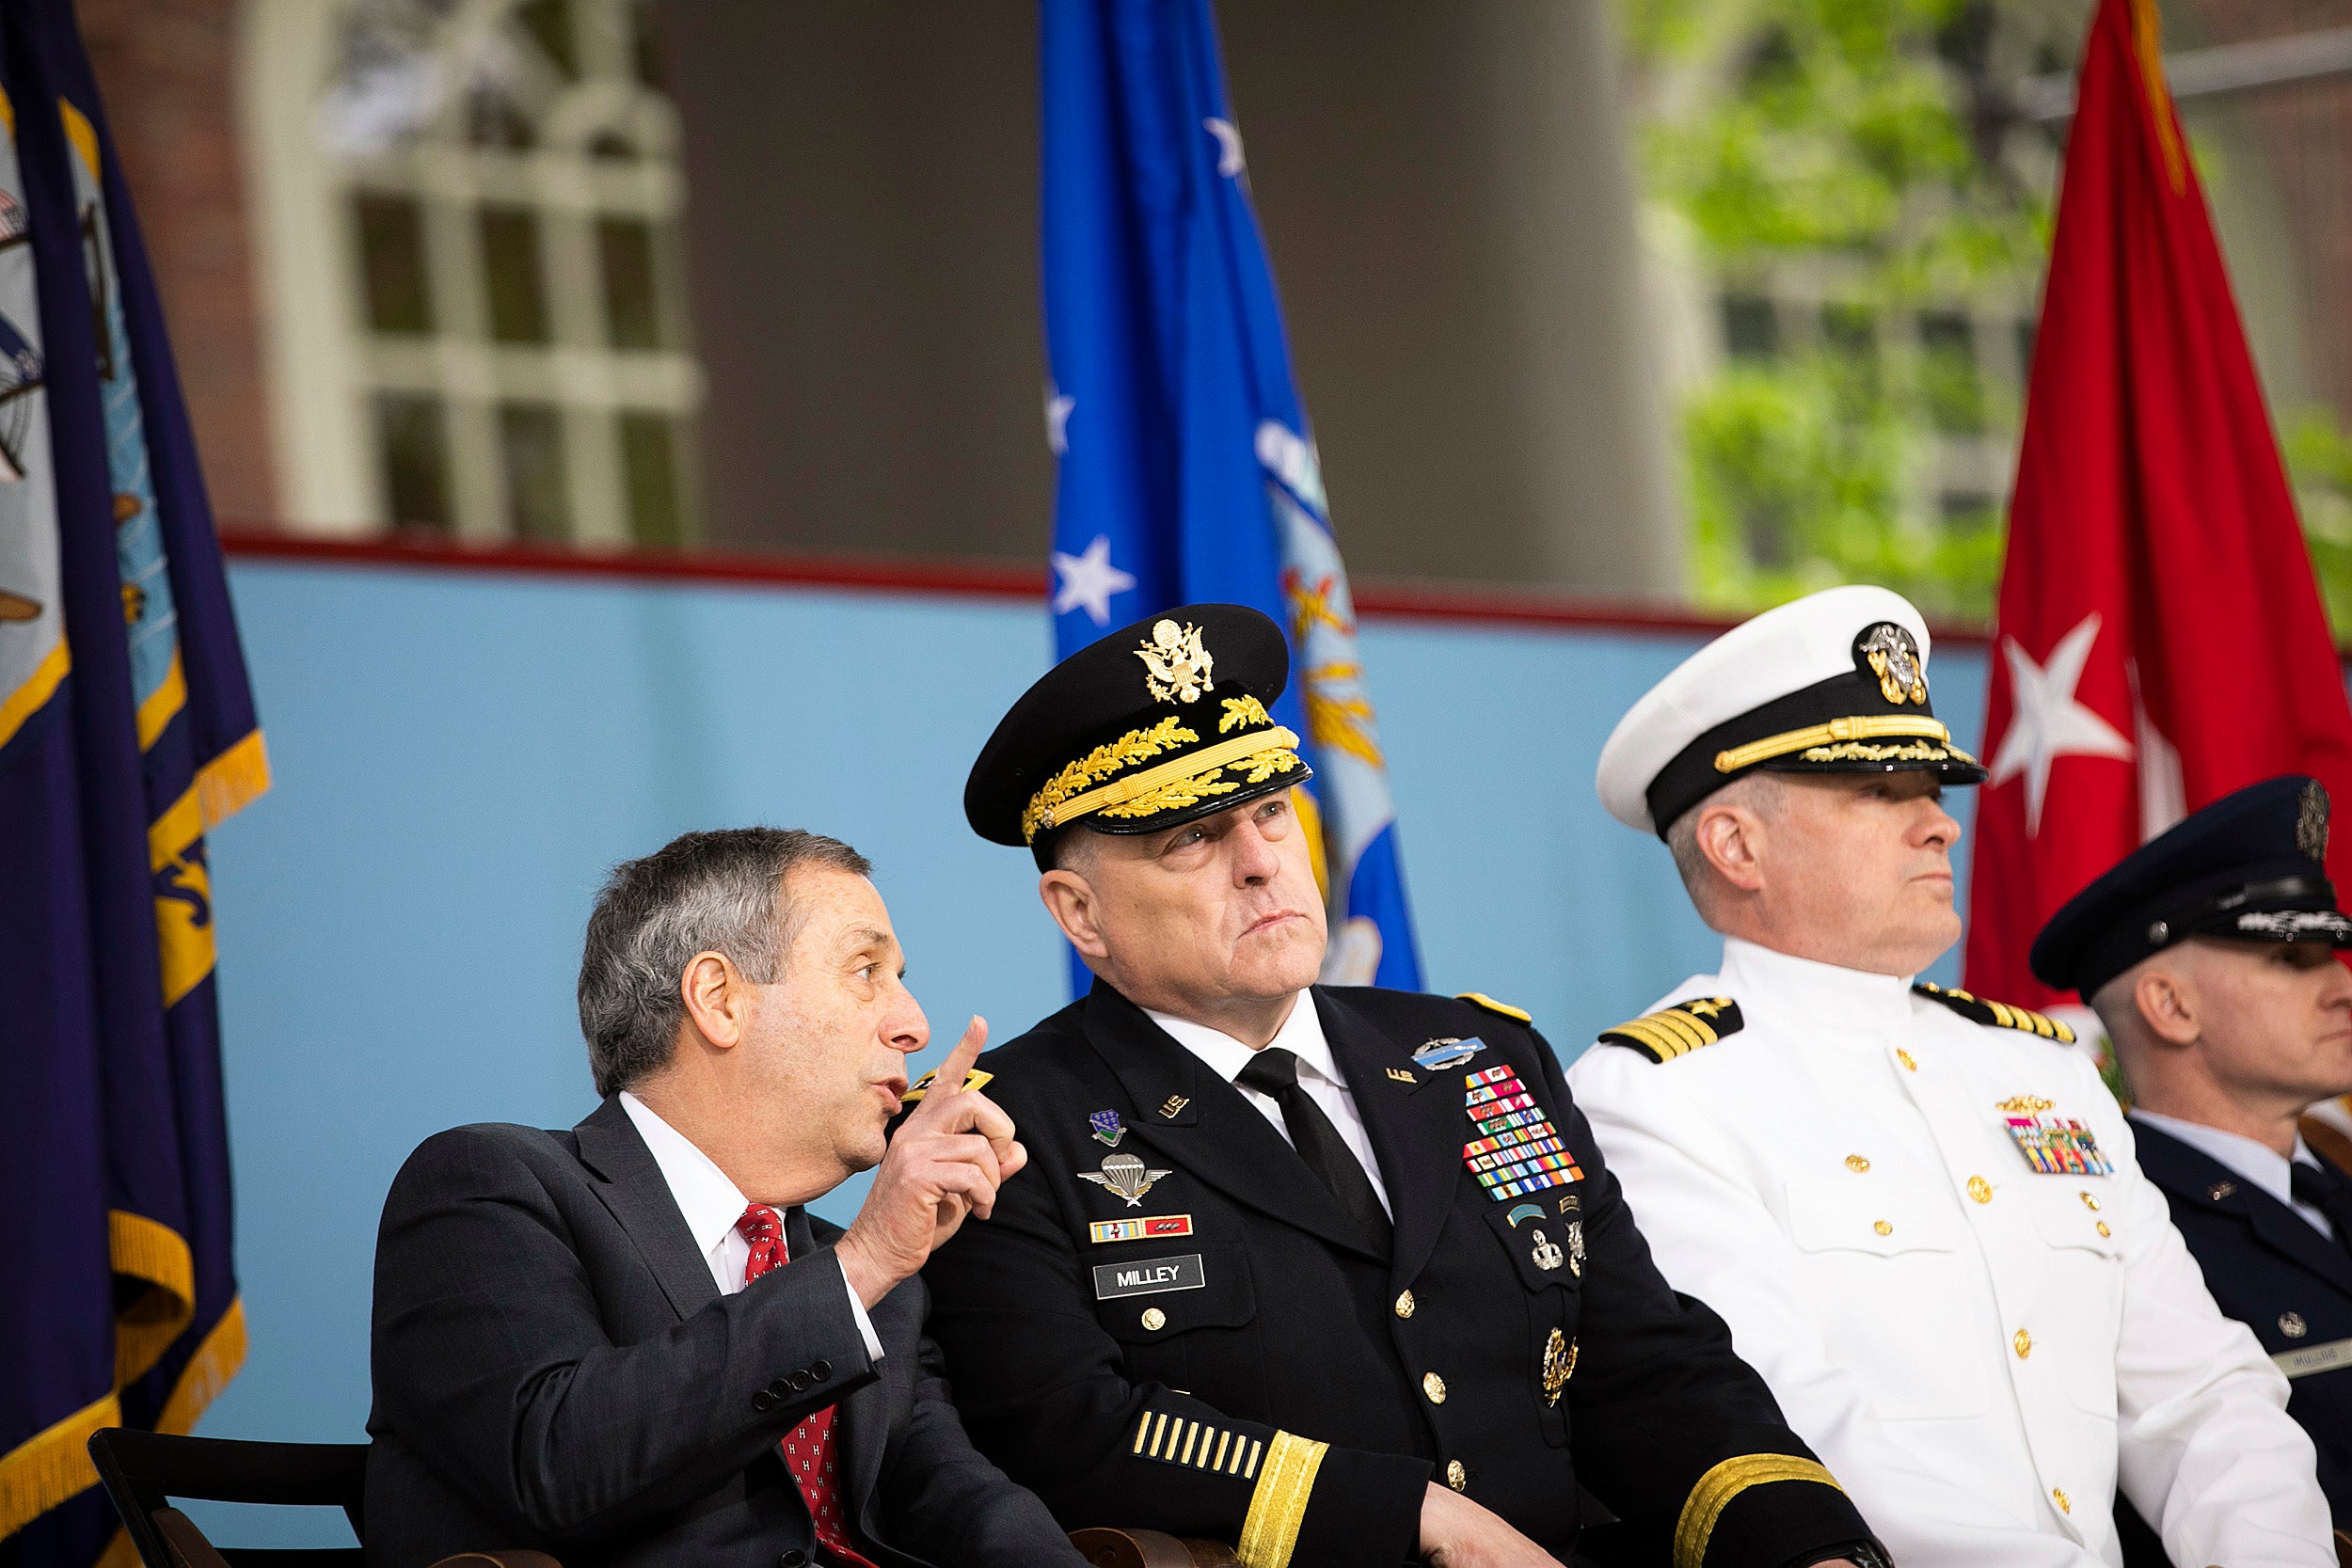 Harvard President Larry Bacow (left) speaks with General Mark A. Milley during there event.